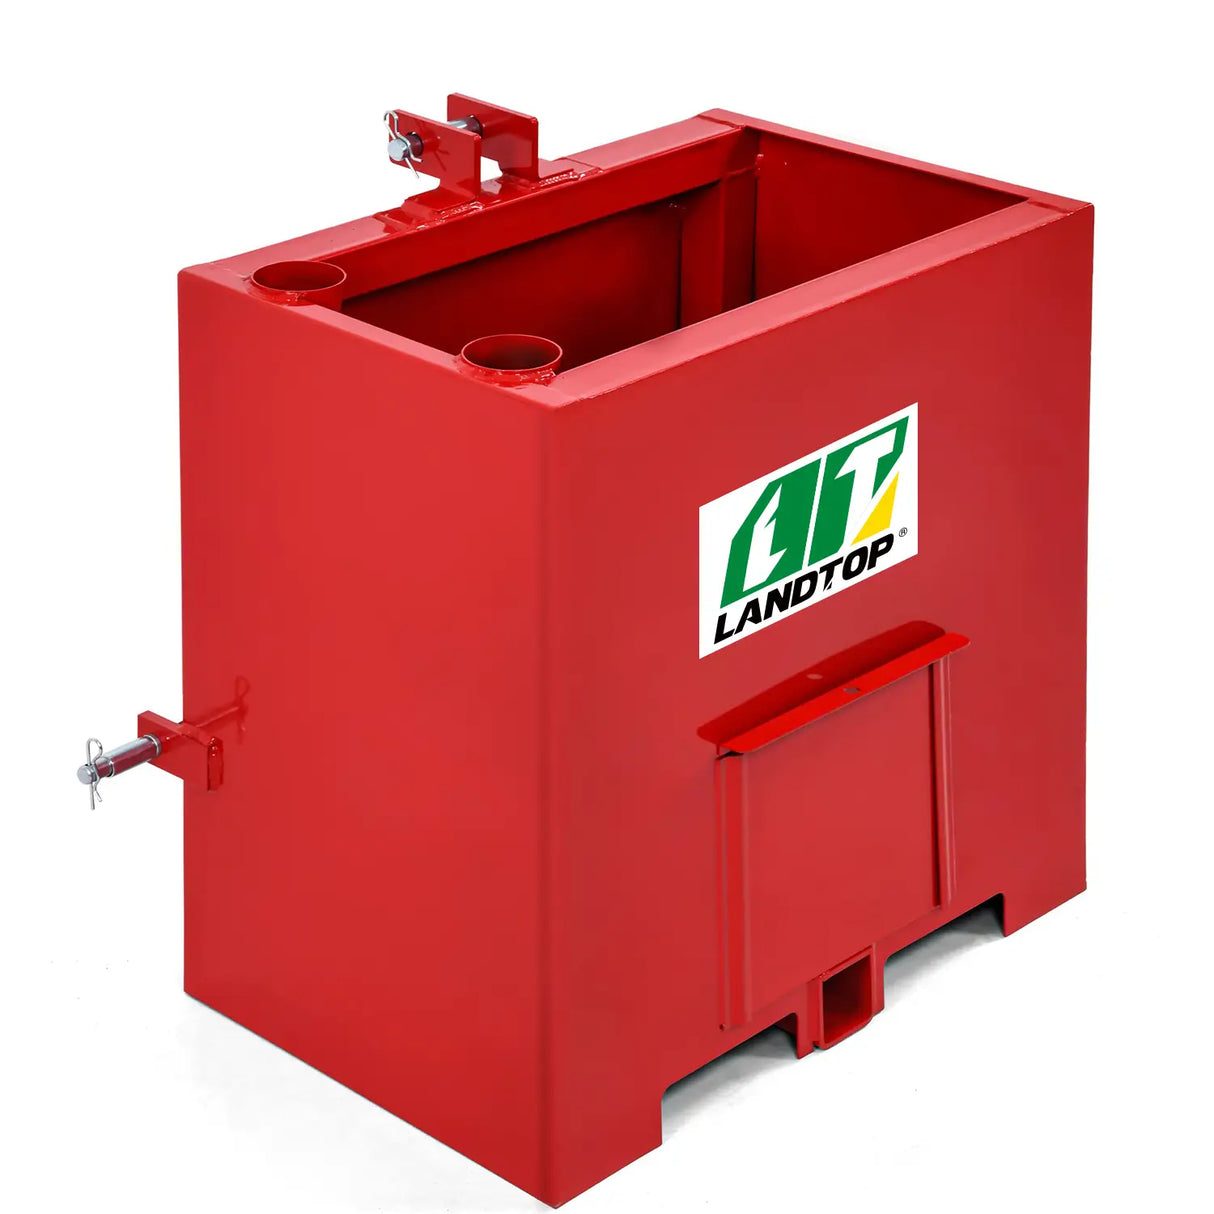 Red 800 lbs 3 Point Hitch Tractor Ballast Box Fits Category 1 Tractors Attachment with 2" Quick Hitch Receiver